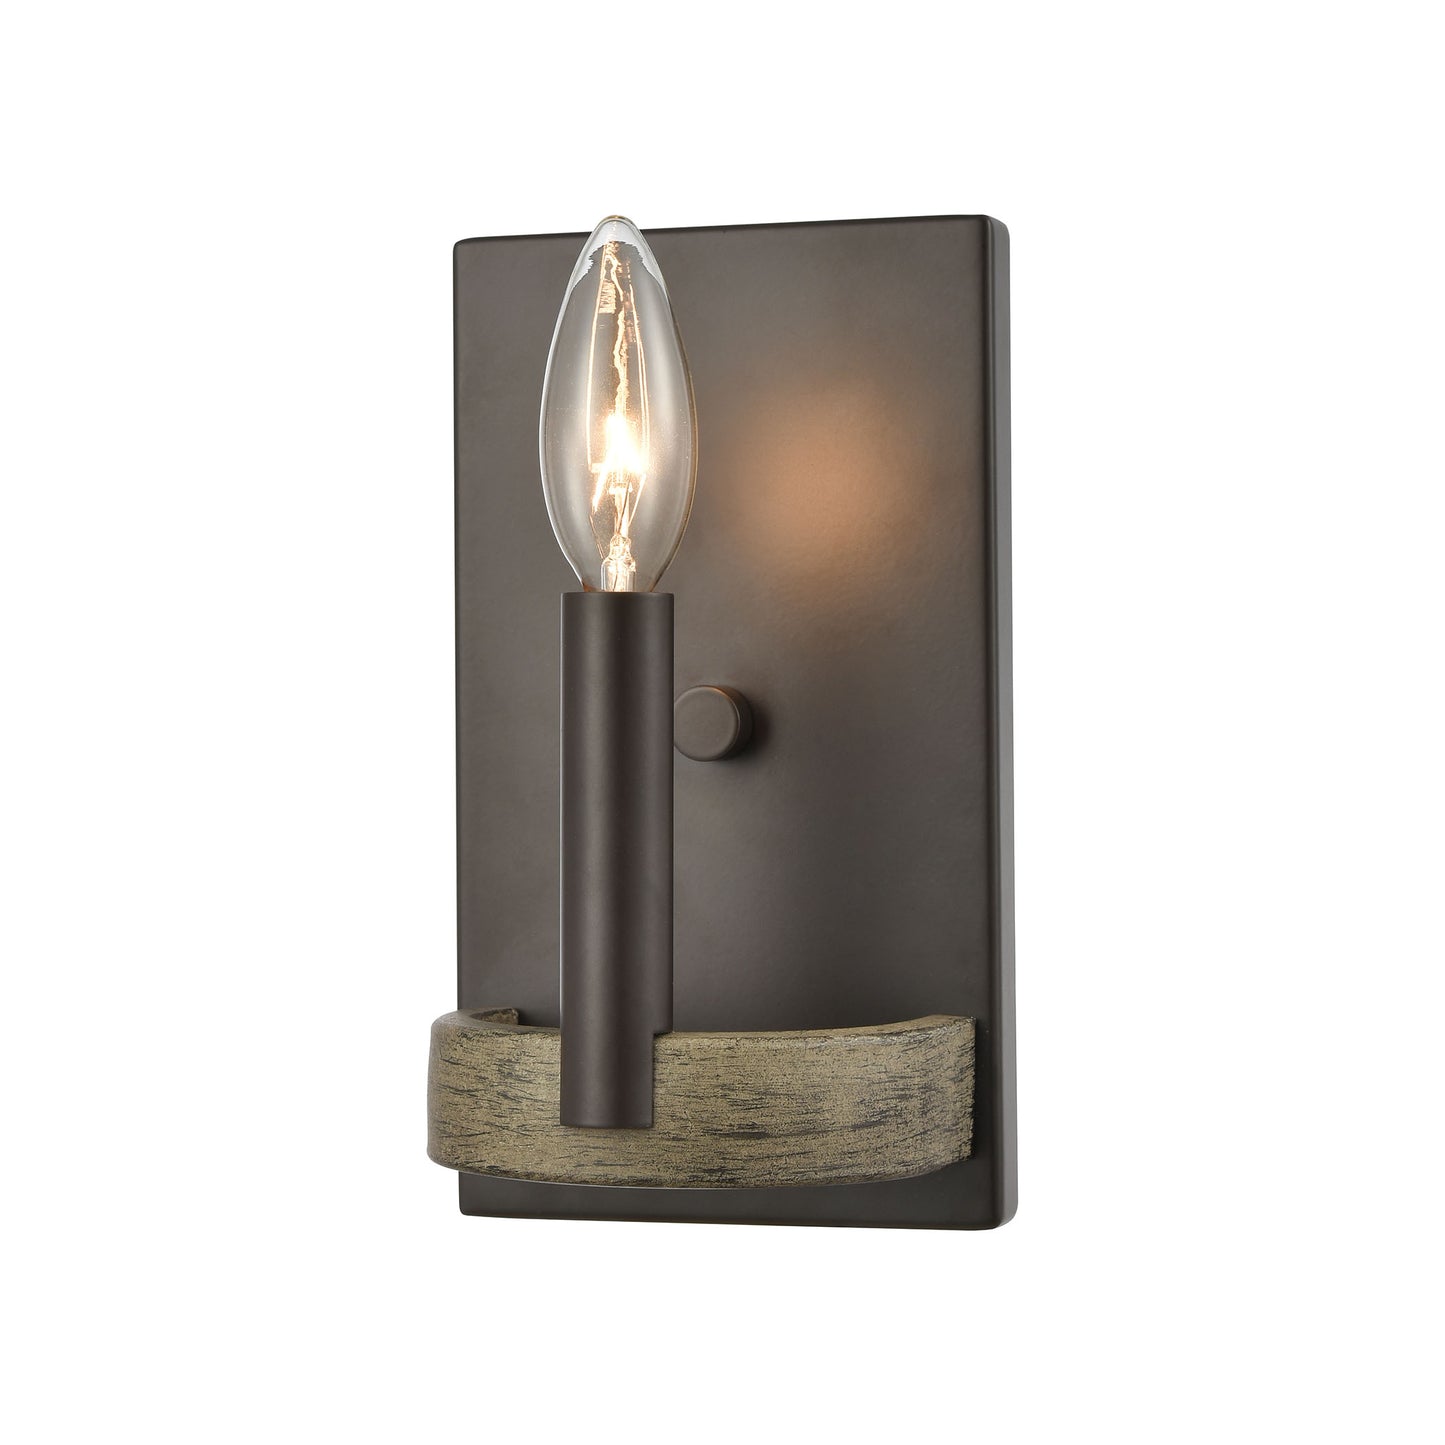 ELK Lighting 12310/1 - Transitions 5" Wide 1-Light Sconce in Oil Rubbed Bronze and Aspen